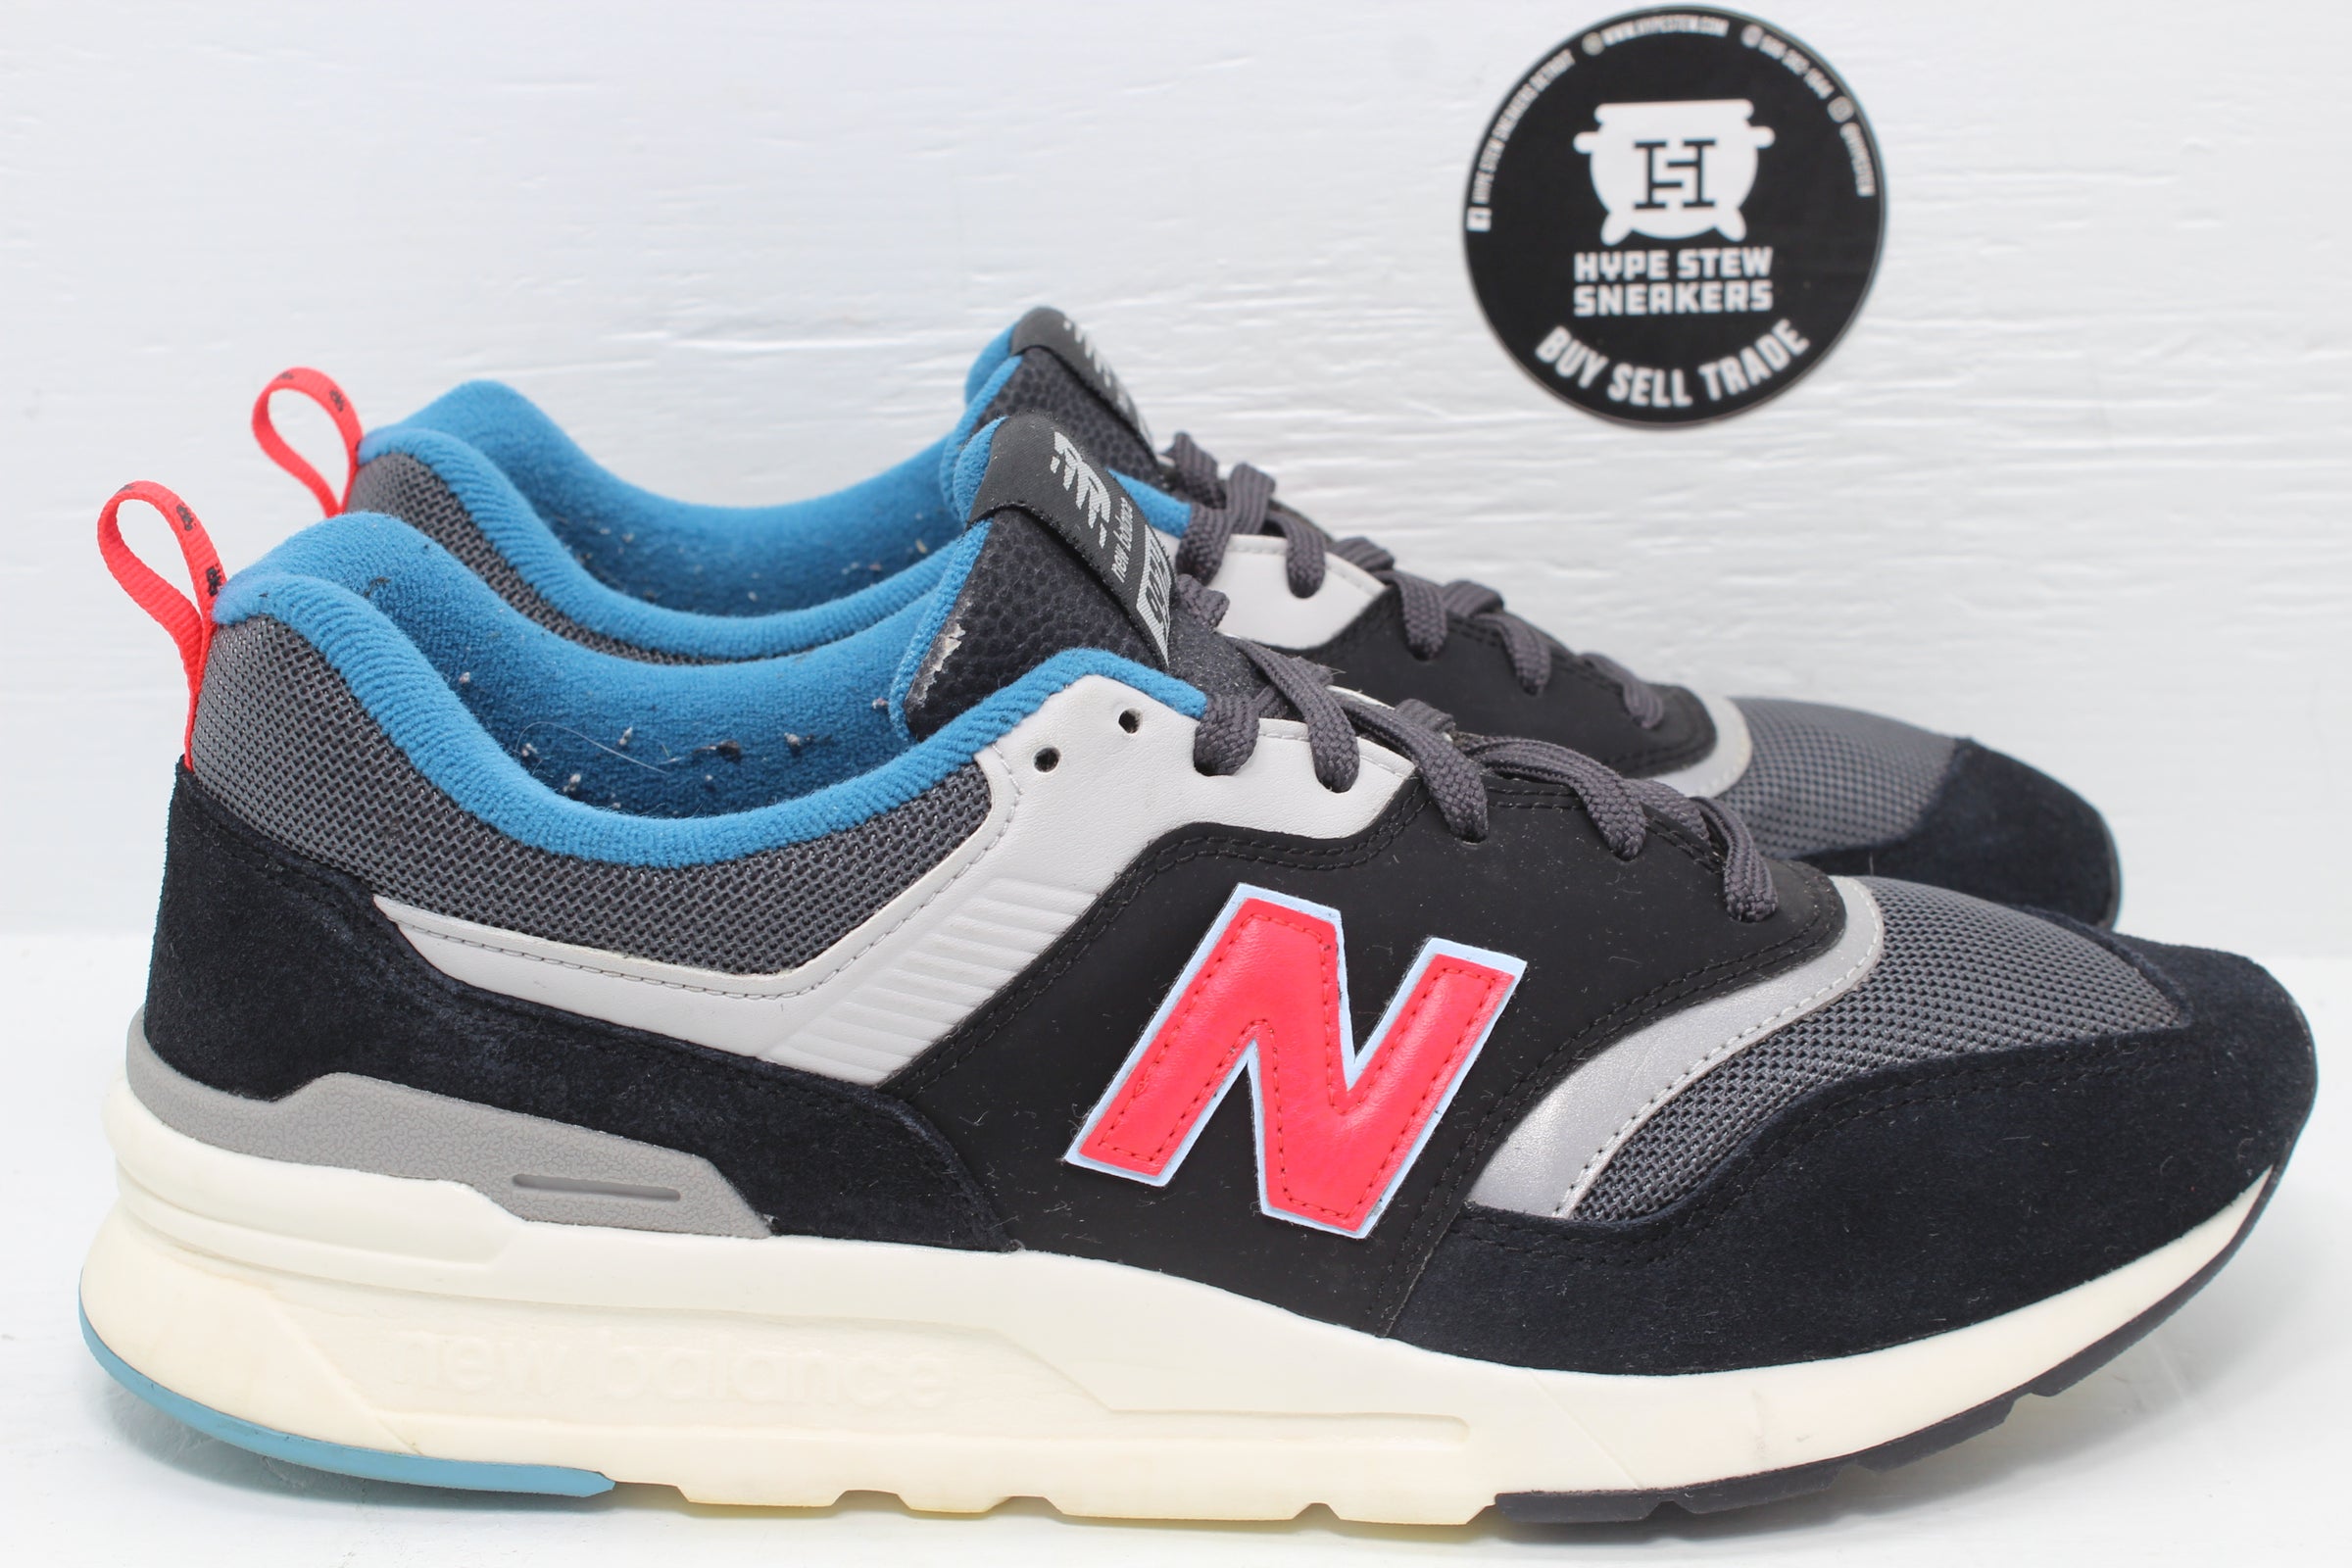 New Balance Men's 991v1 - Made in UK Sneakers in Magnet/Vulcan/Smoked Pearl  New Balance